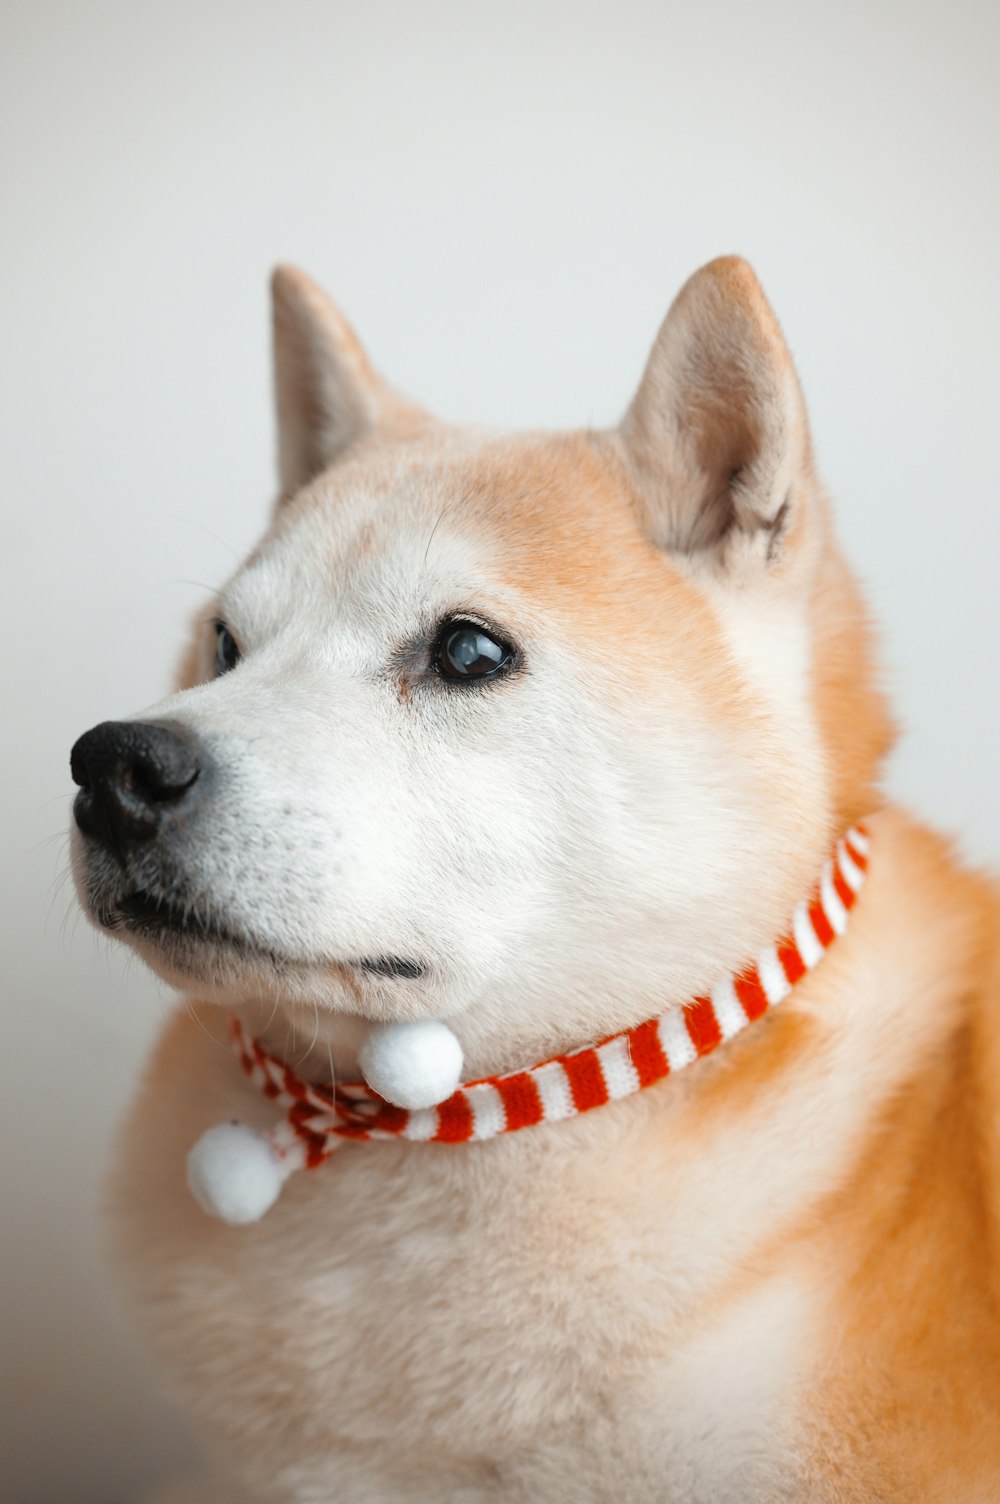 a close up of a dog wearing a red and white collar